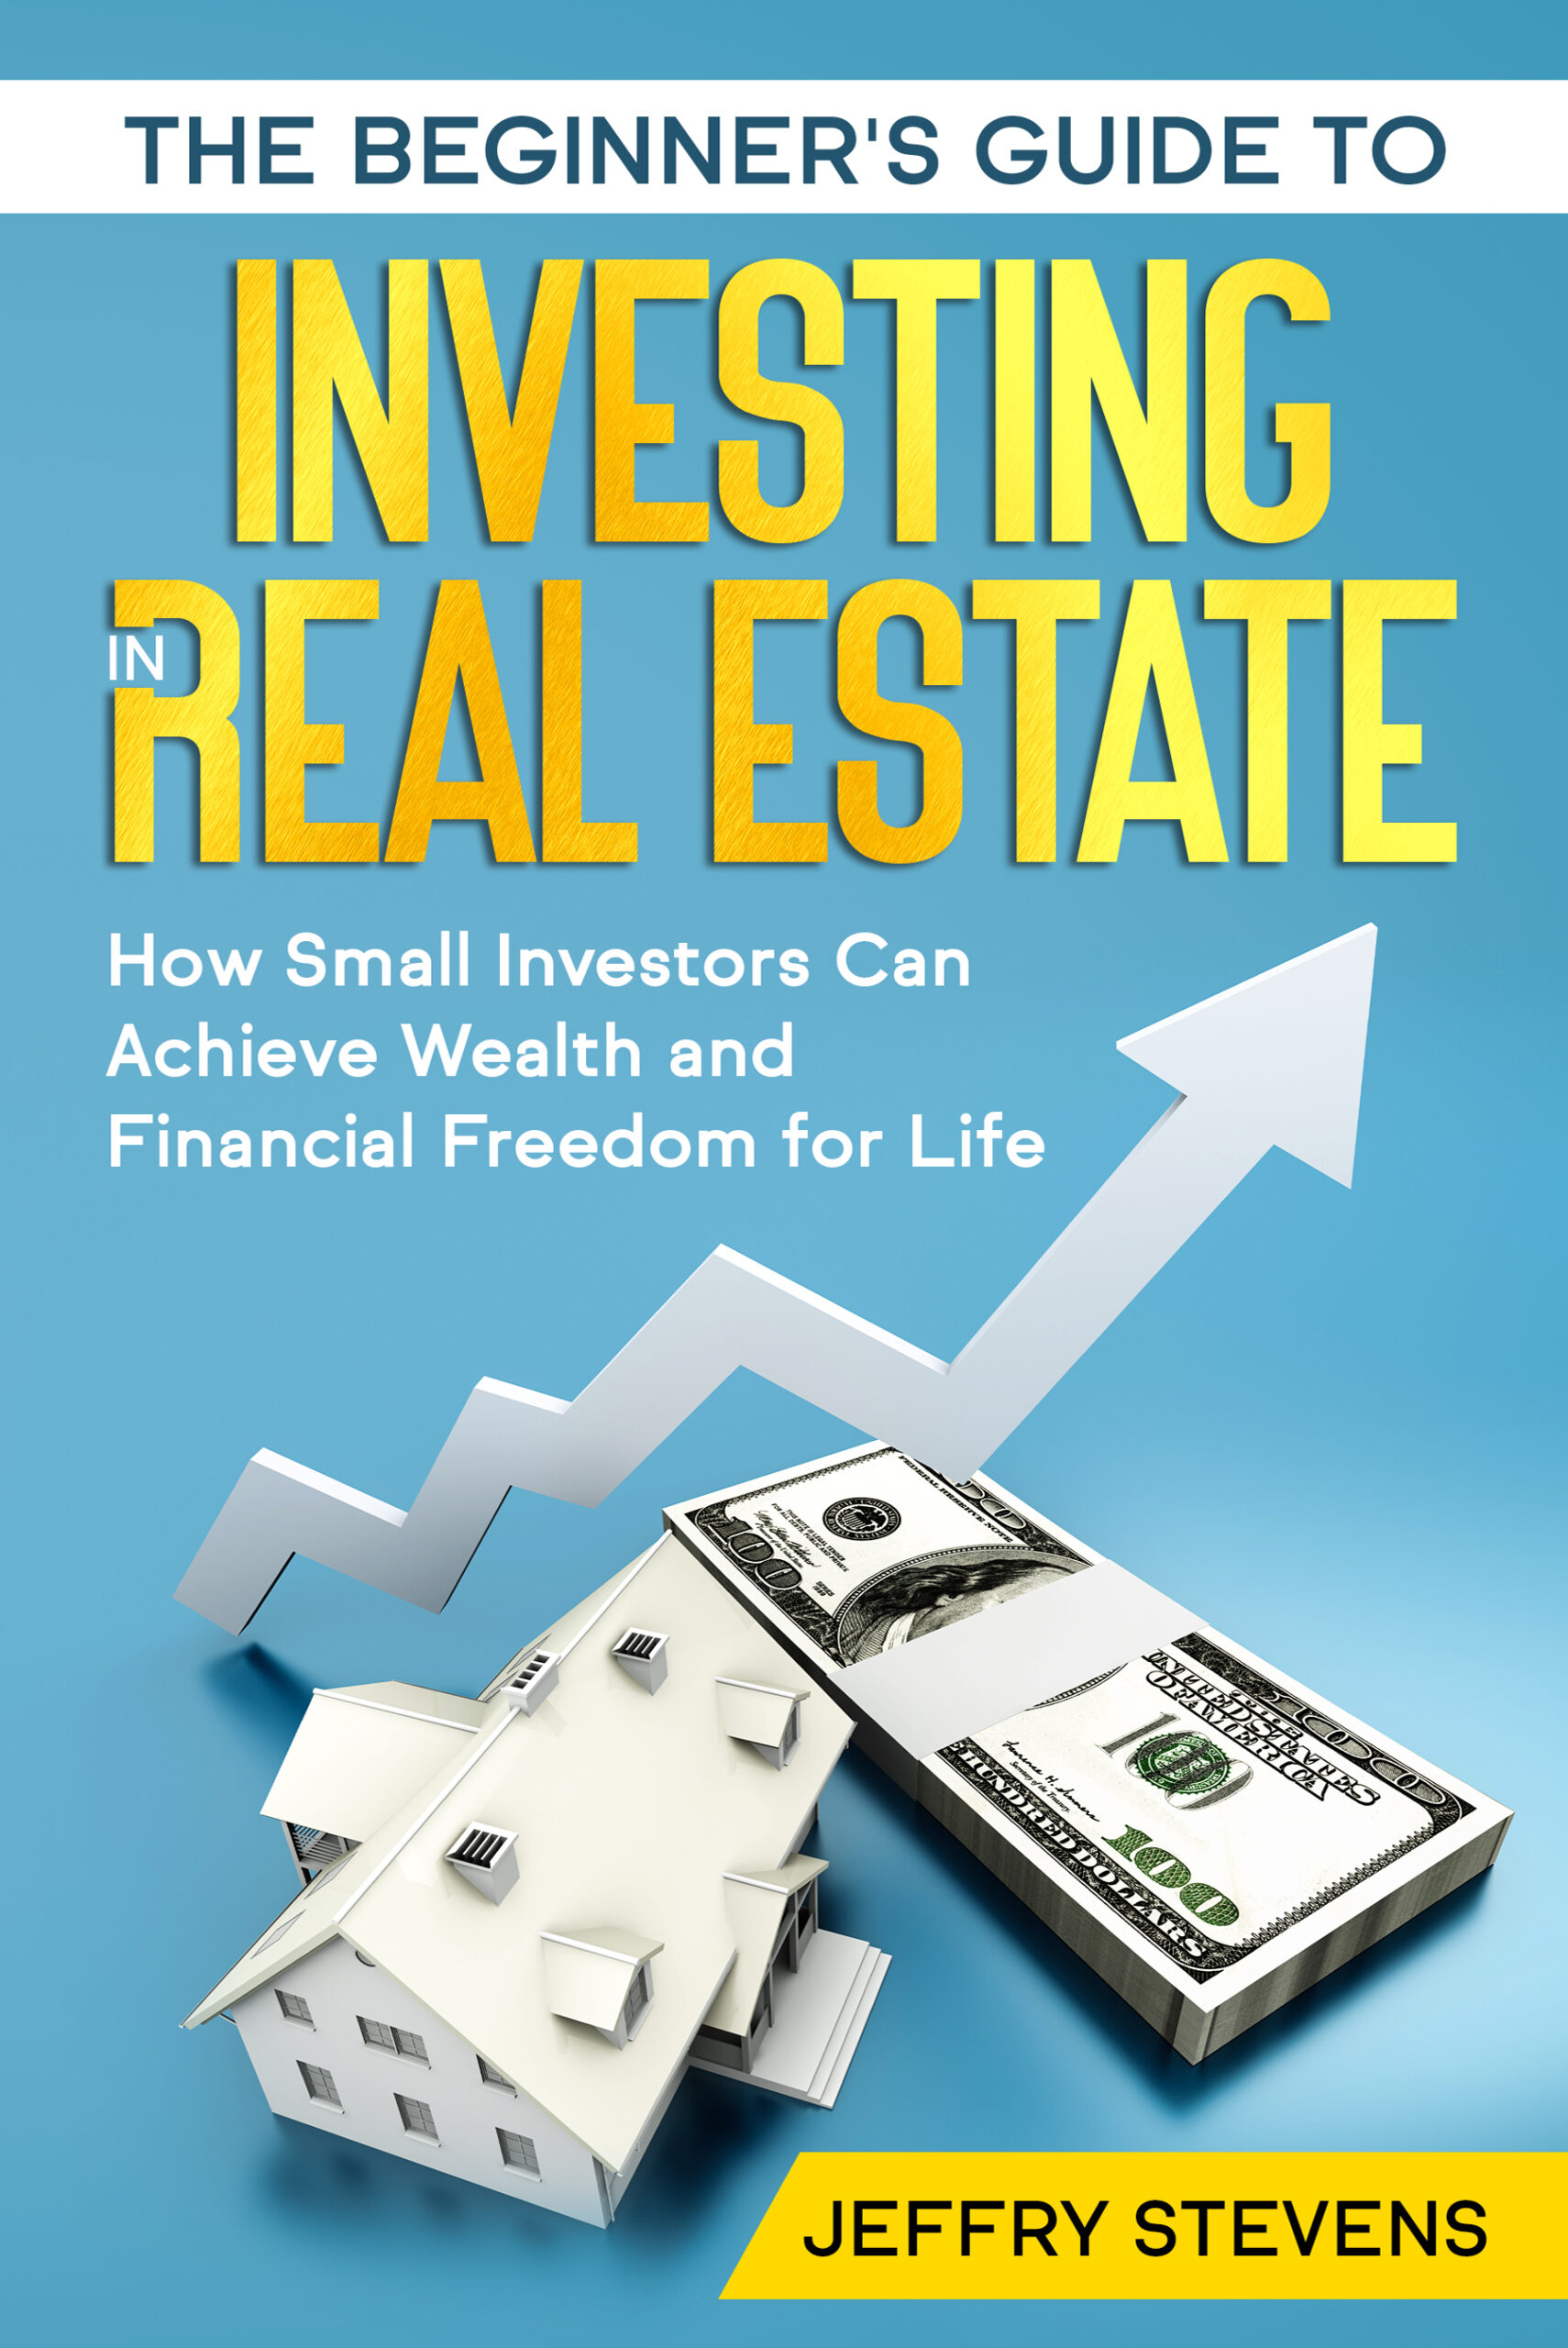 FREE: Investing in Real Estate by Jeffrey Stevens